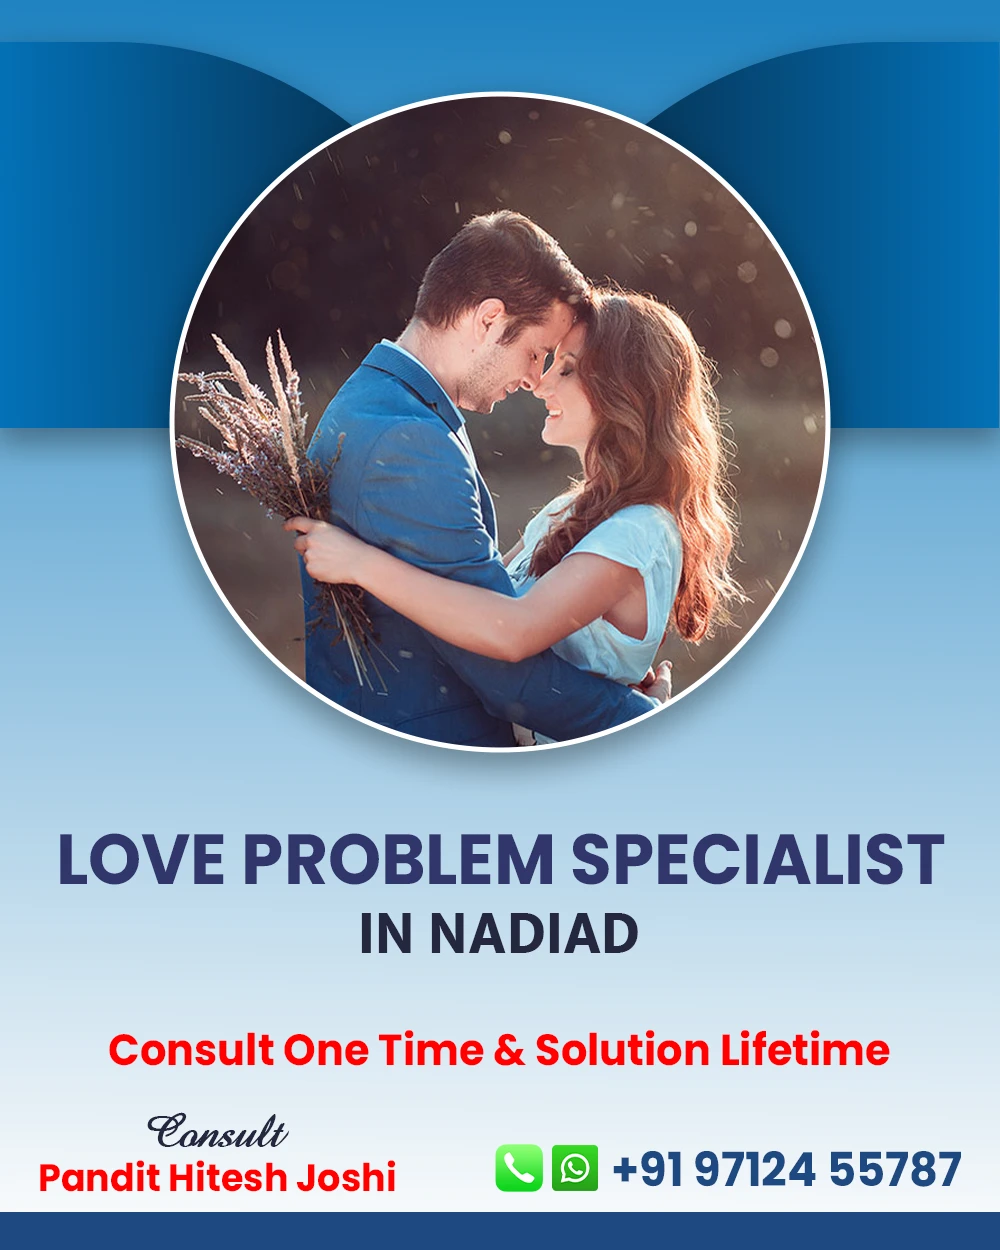 Love Problem Specialist in Nadiad